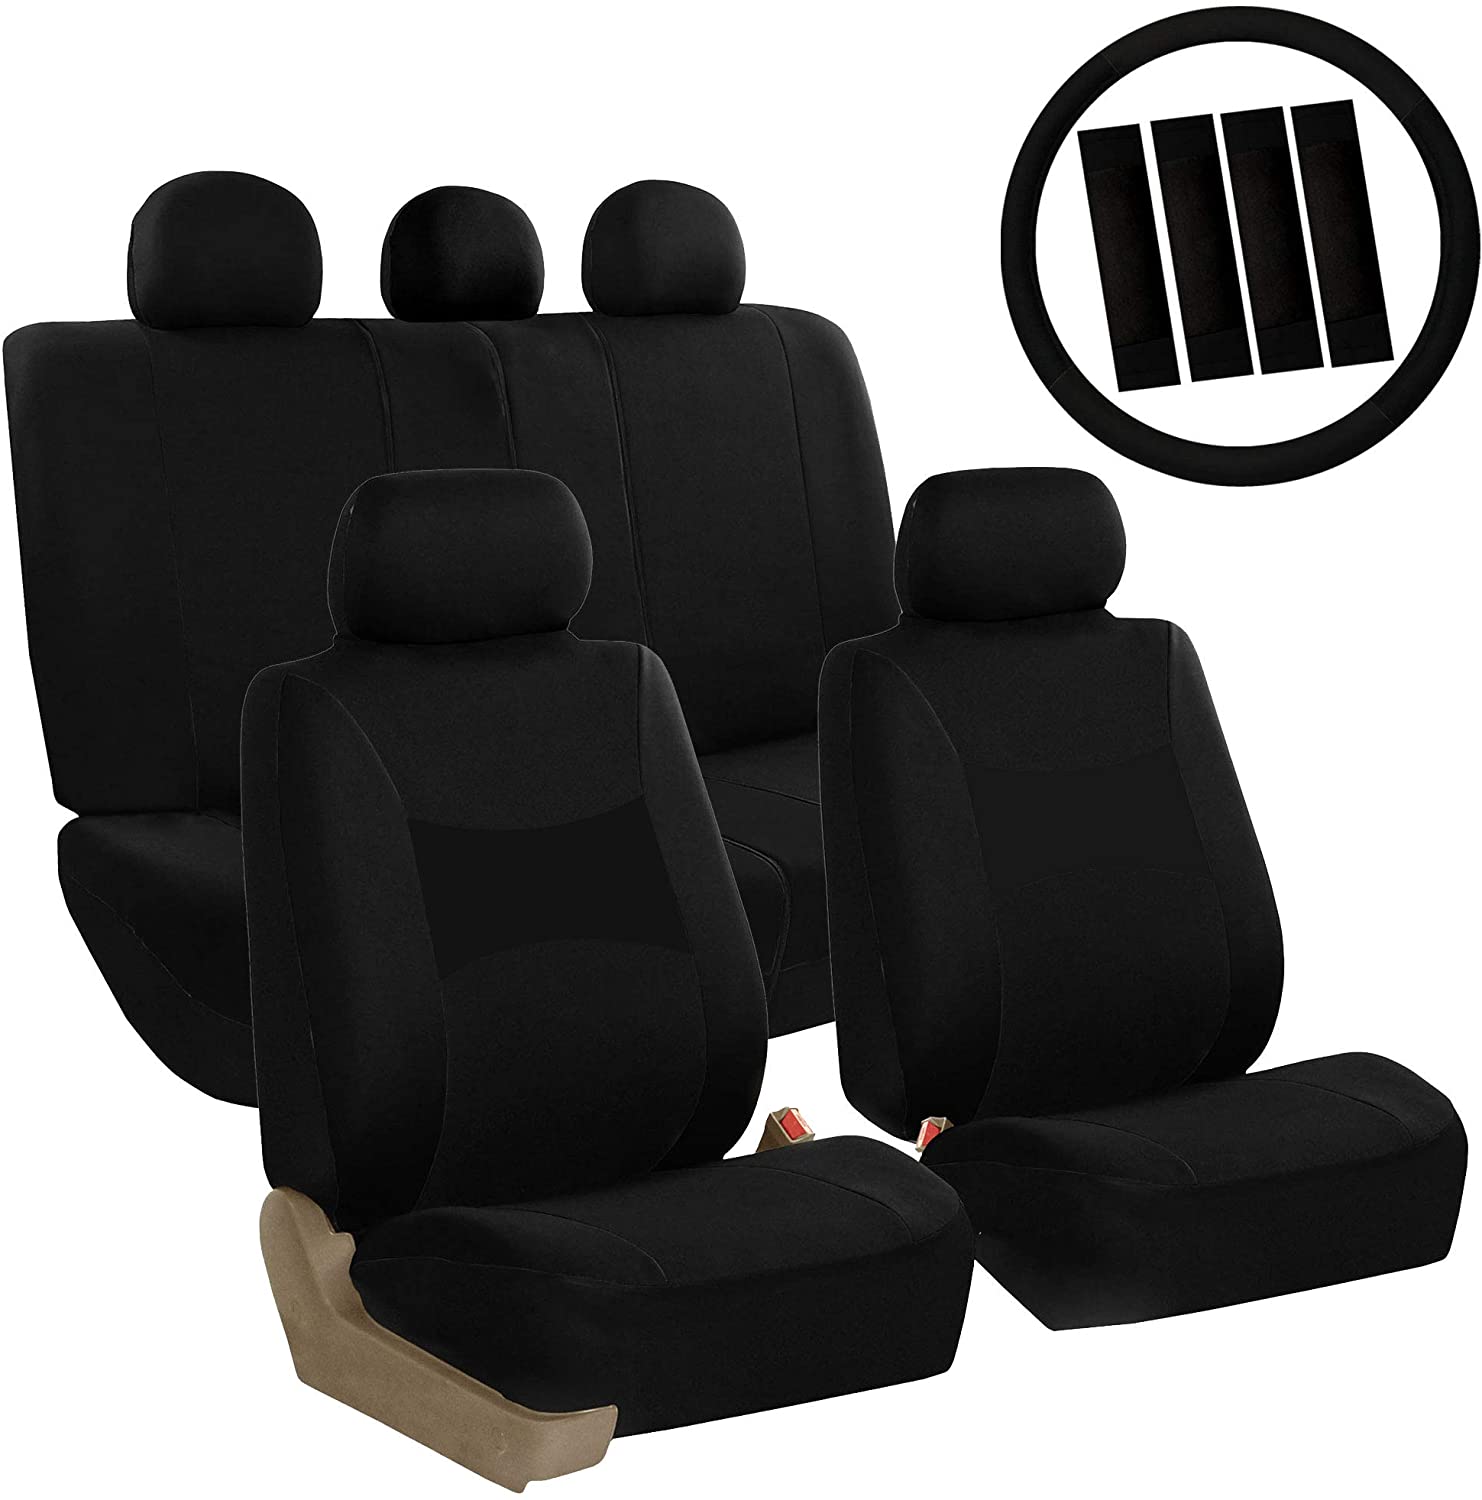 10 Best Car Seat Covers to Save Your Seats on Your Roadtrips